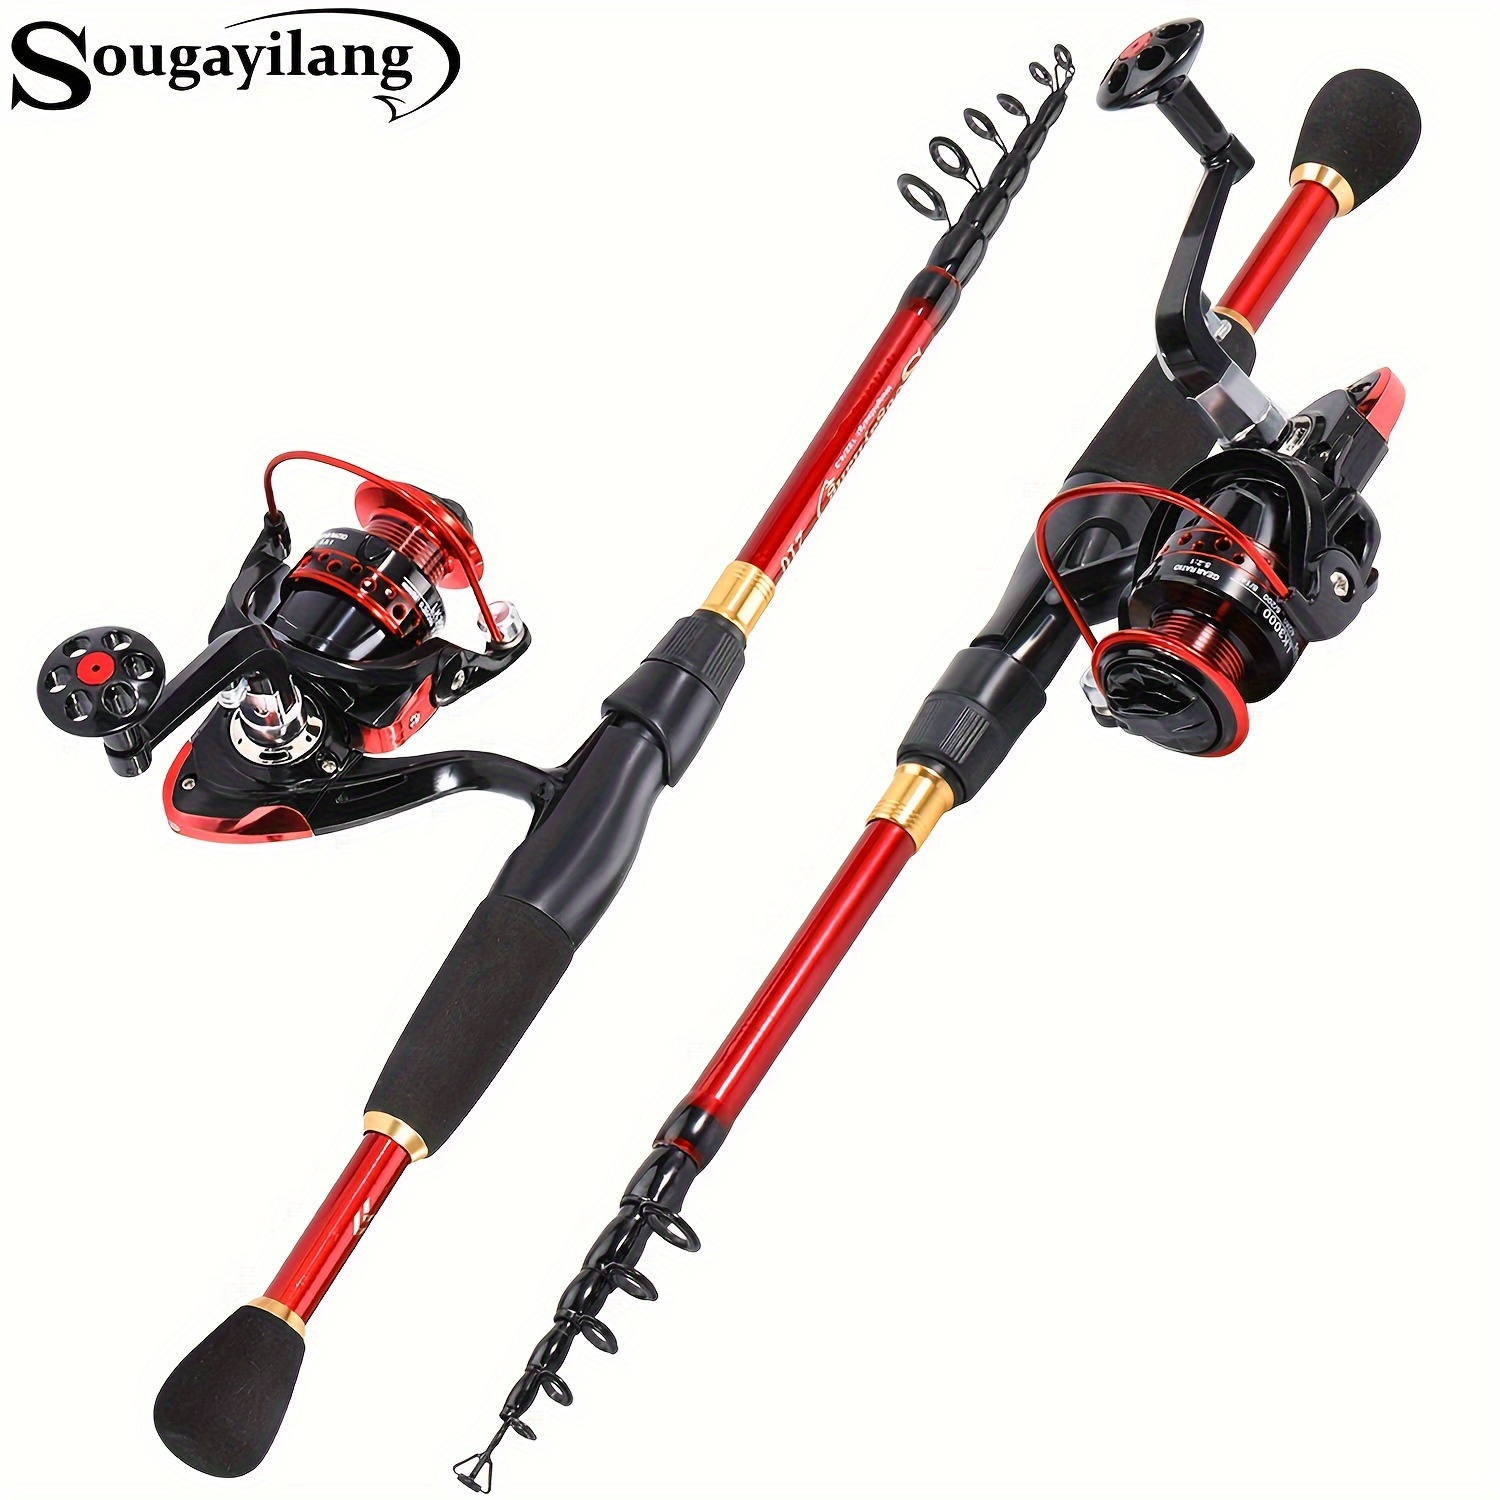 Sougayilang 5 Section Red/Yellow Fishing Set 170cm Fishing Rod and  YW/OE1000-3000 Spinning Reel